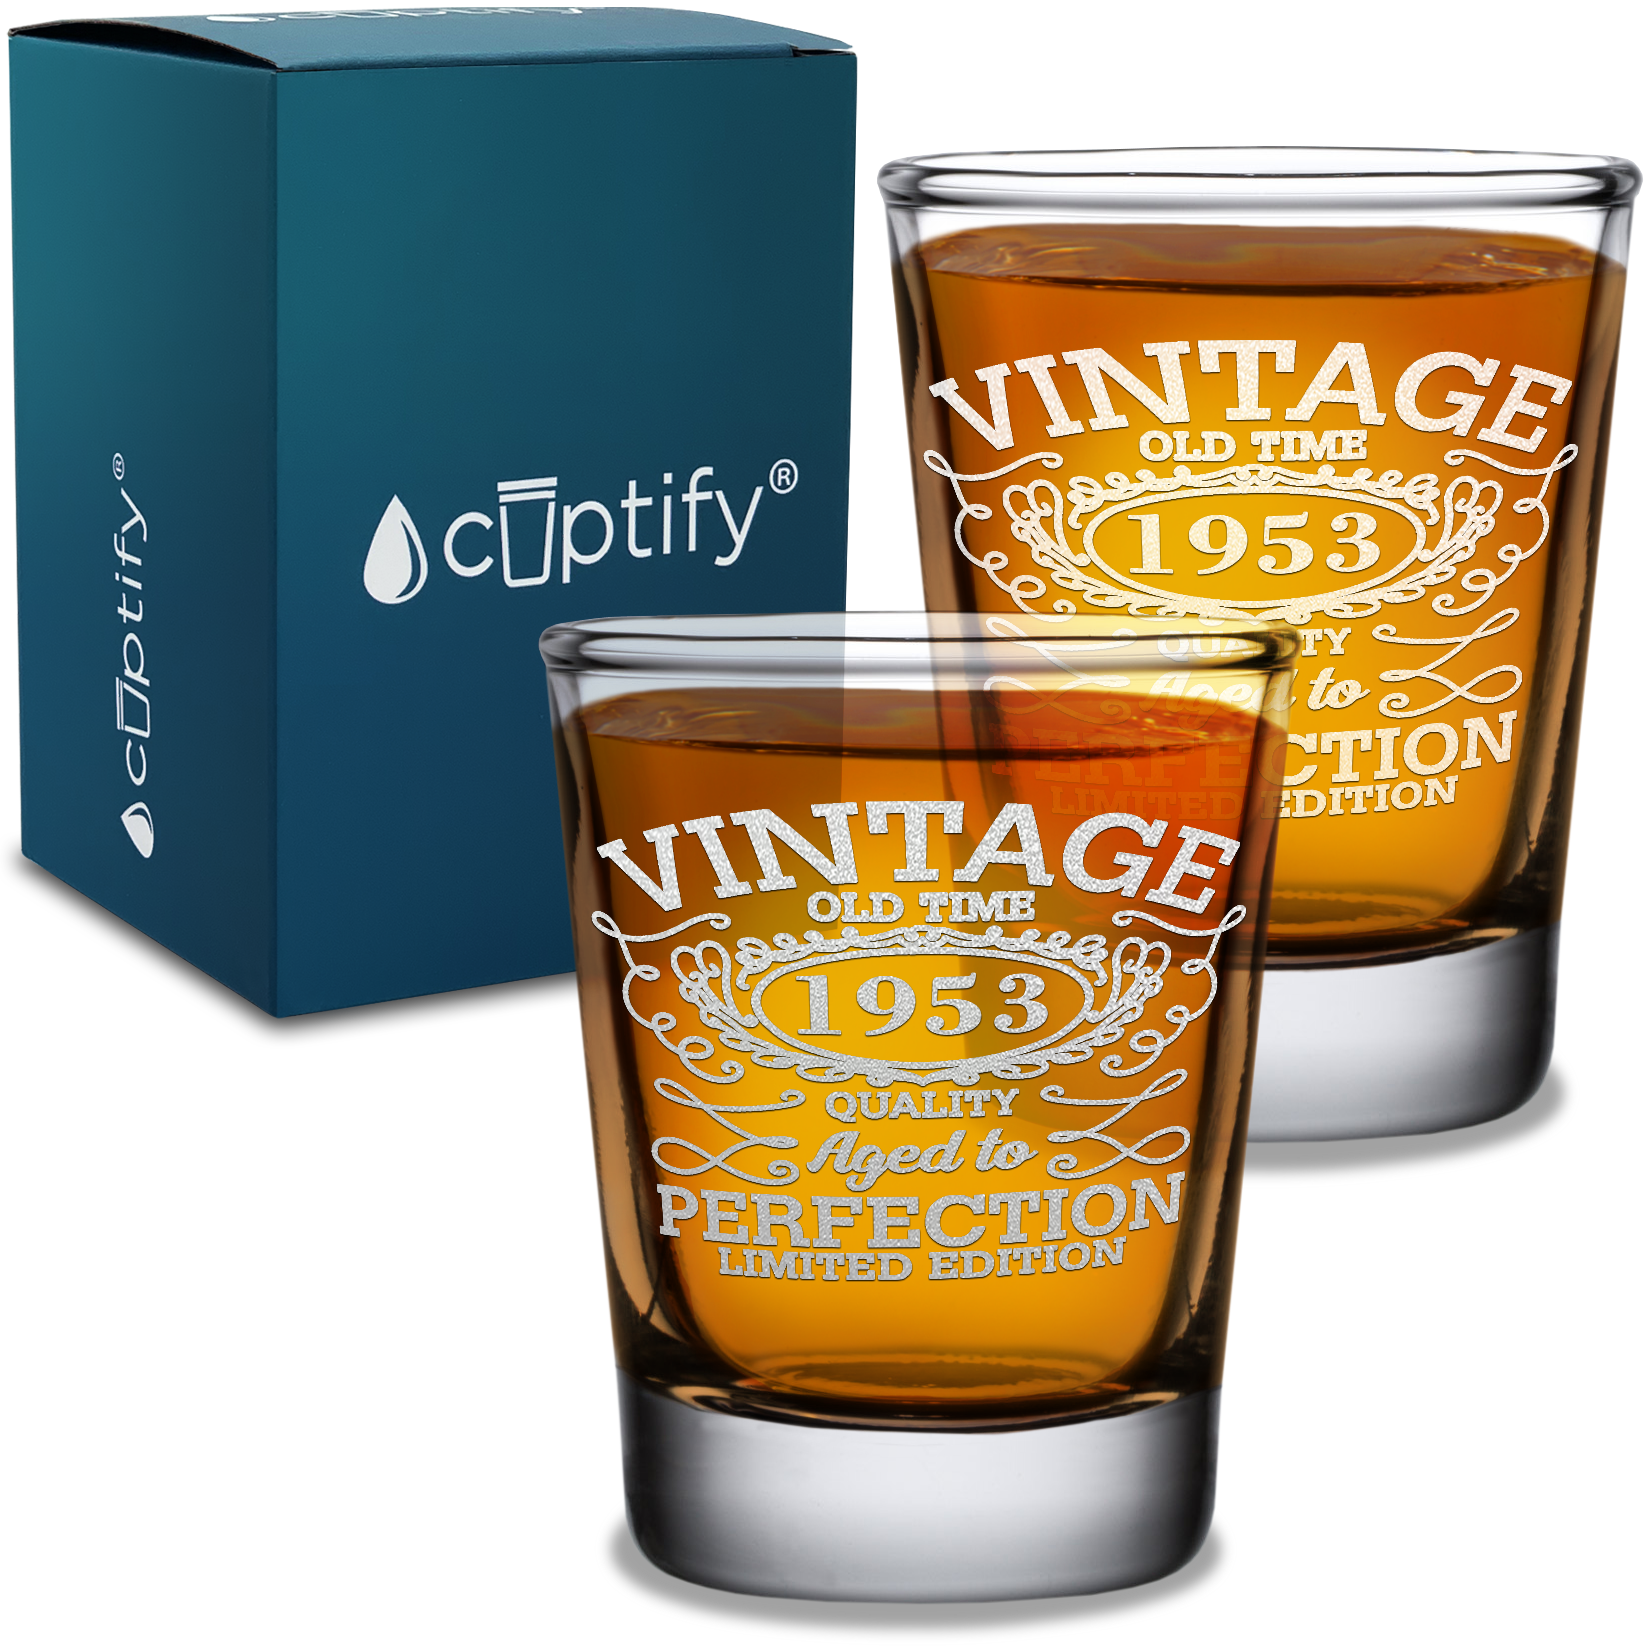 68th Birthday Vintage 68 Years Old Time 1953 Quality Laser Engraved 2oz Shot Glasses - Set of 2